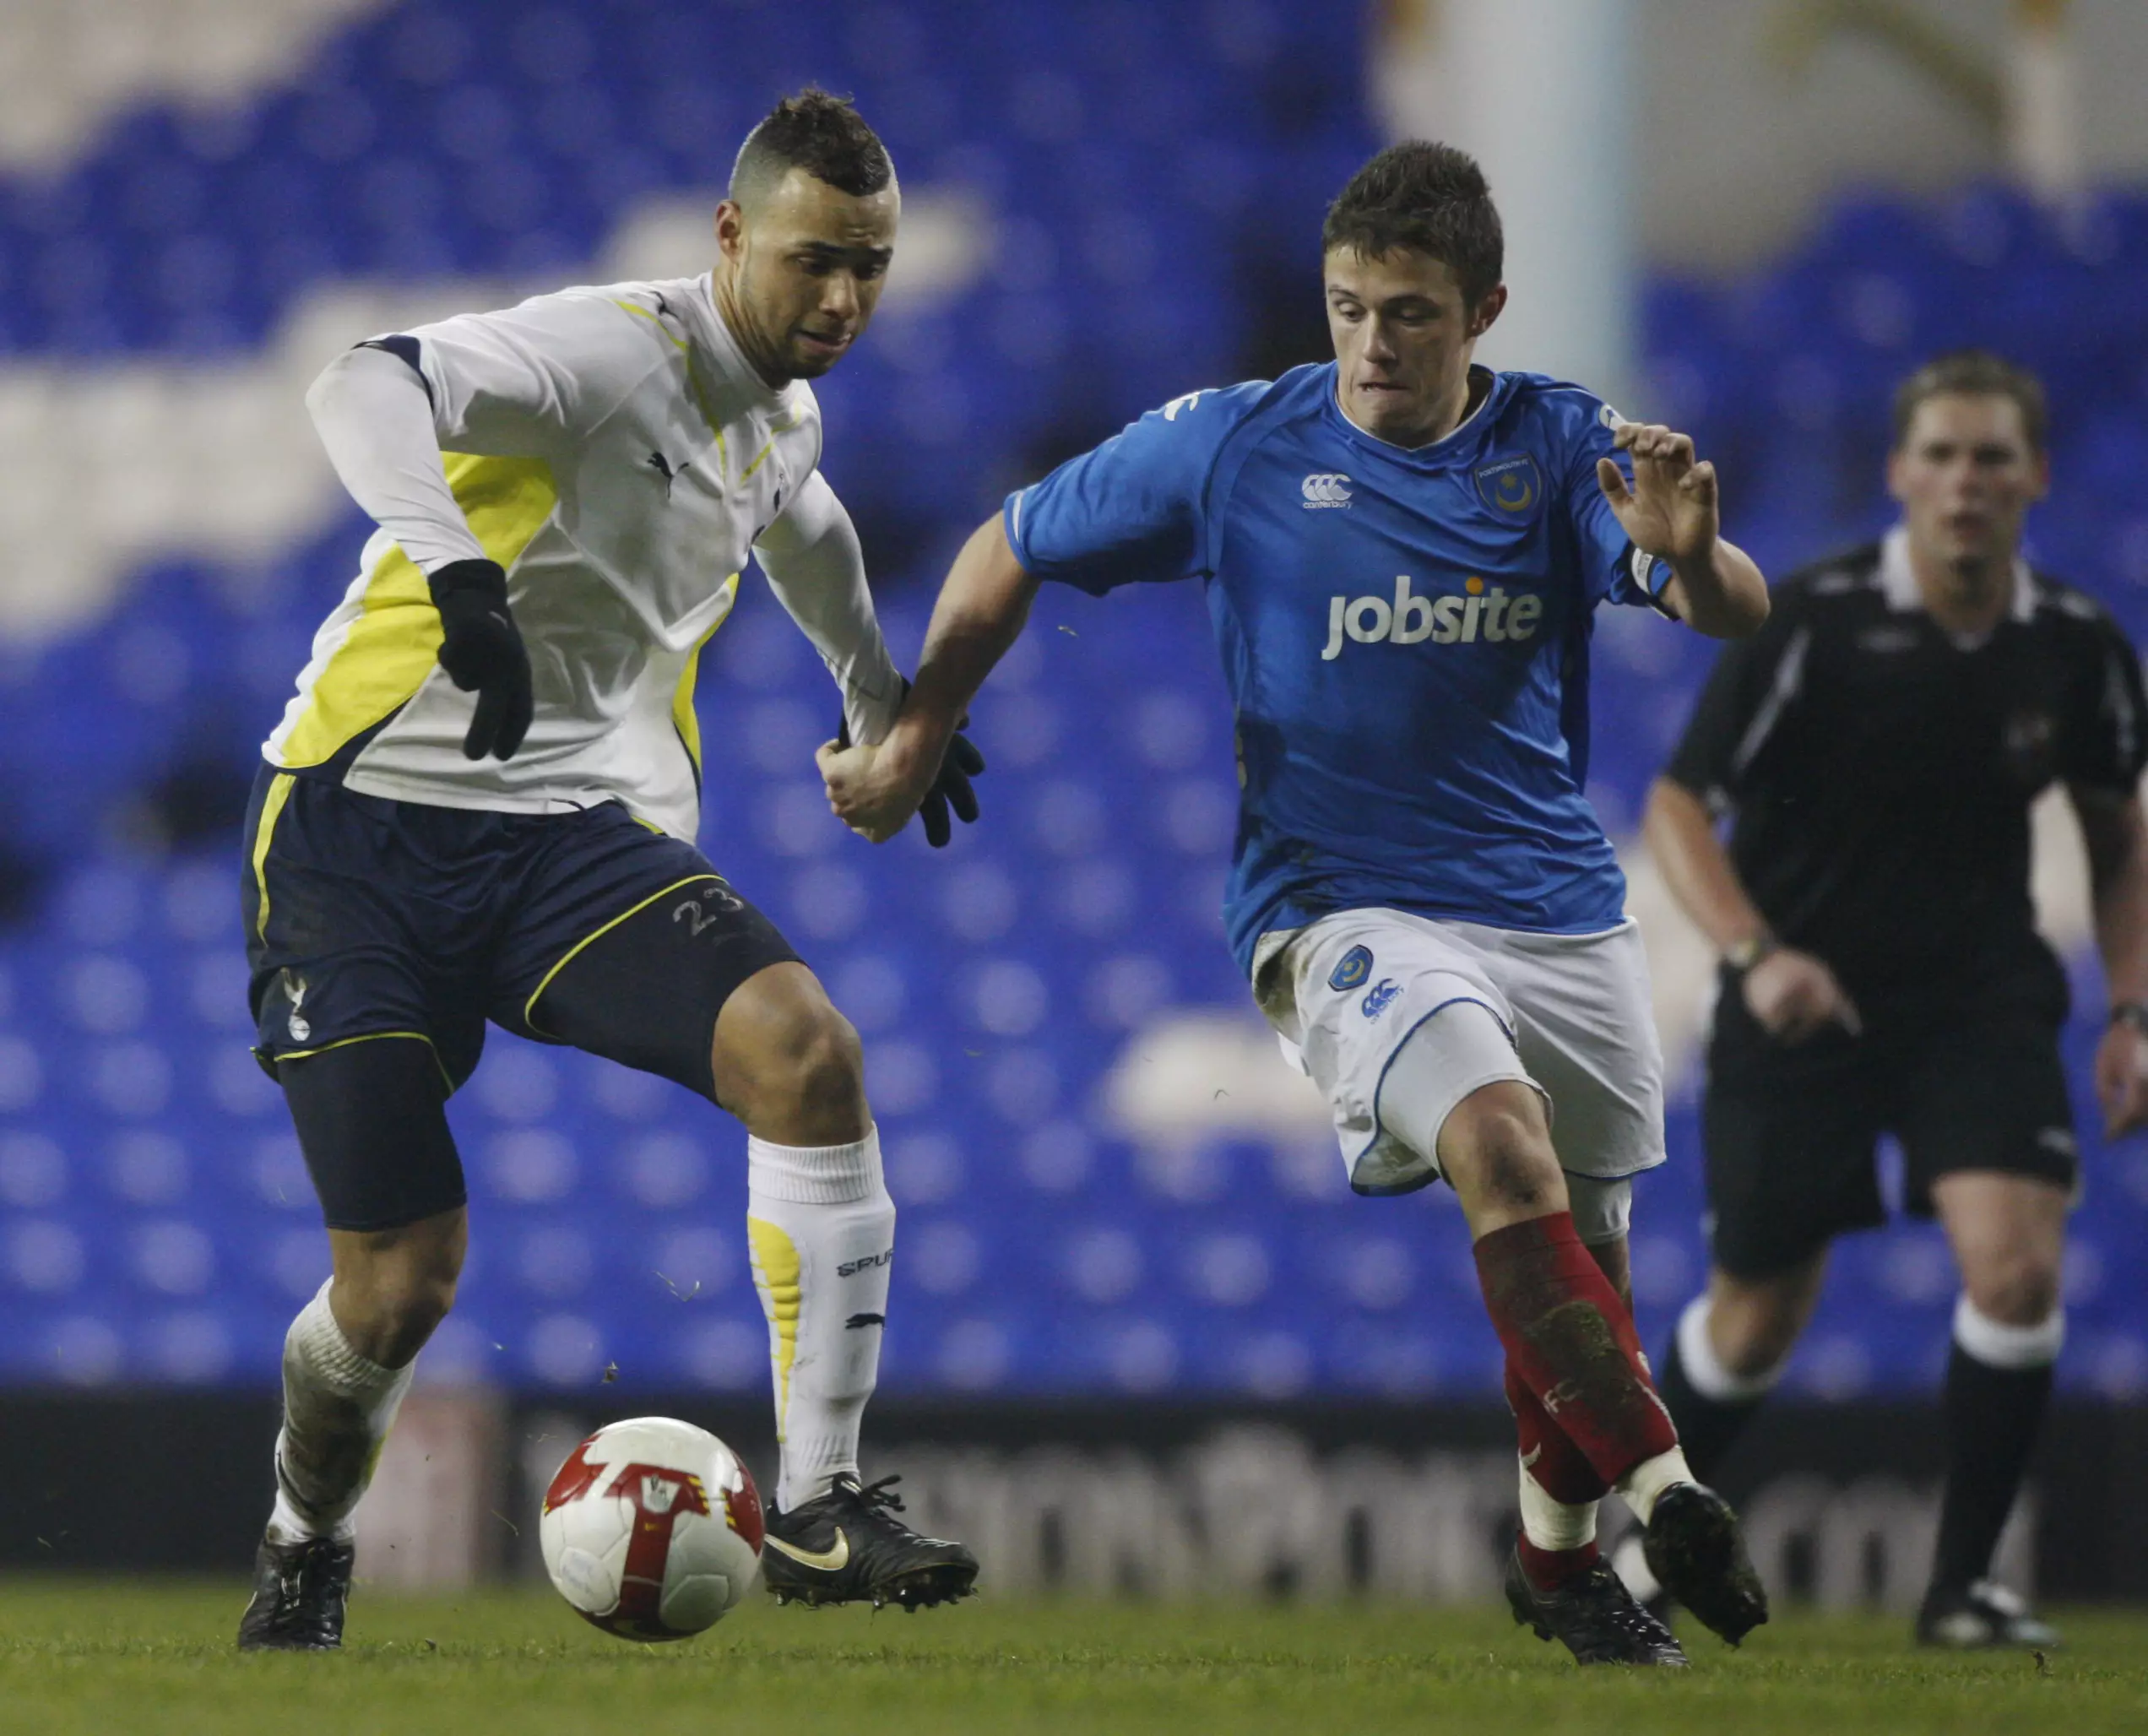 Bostock in action for Spurs. Image: PA